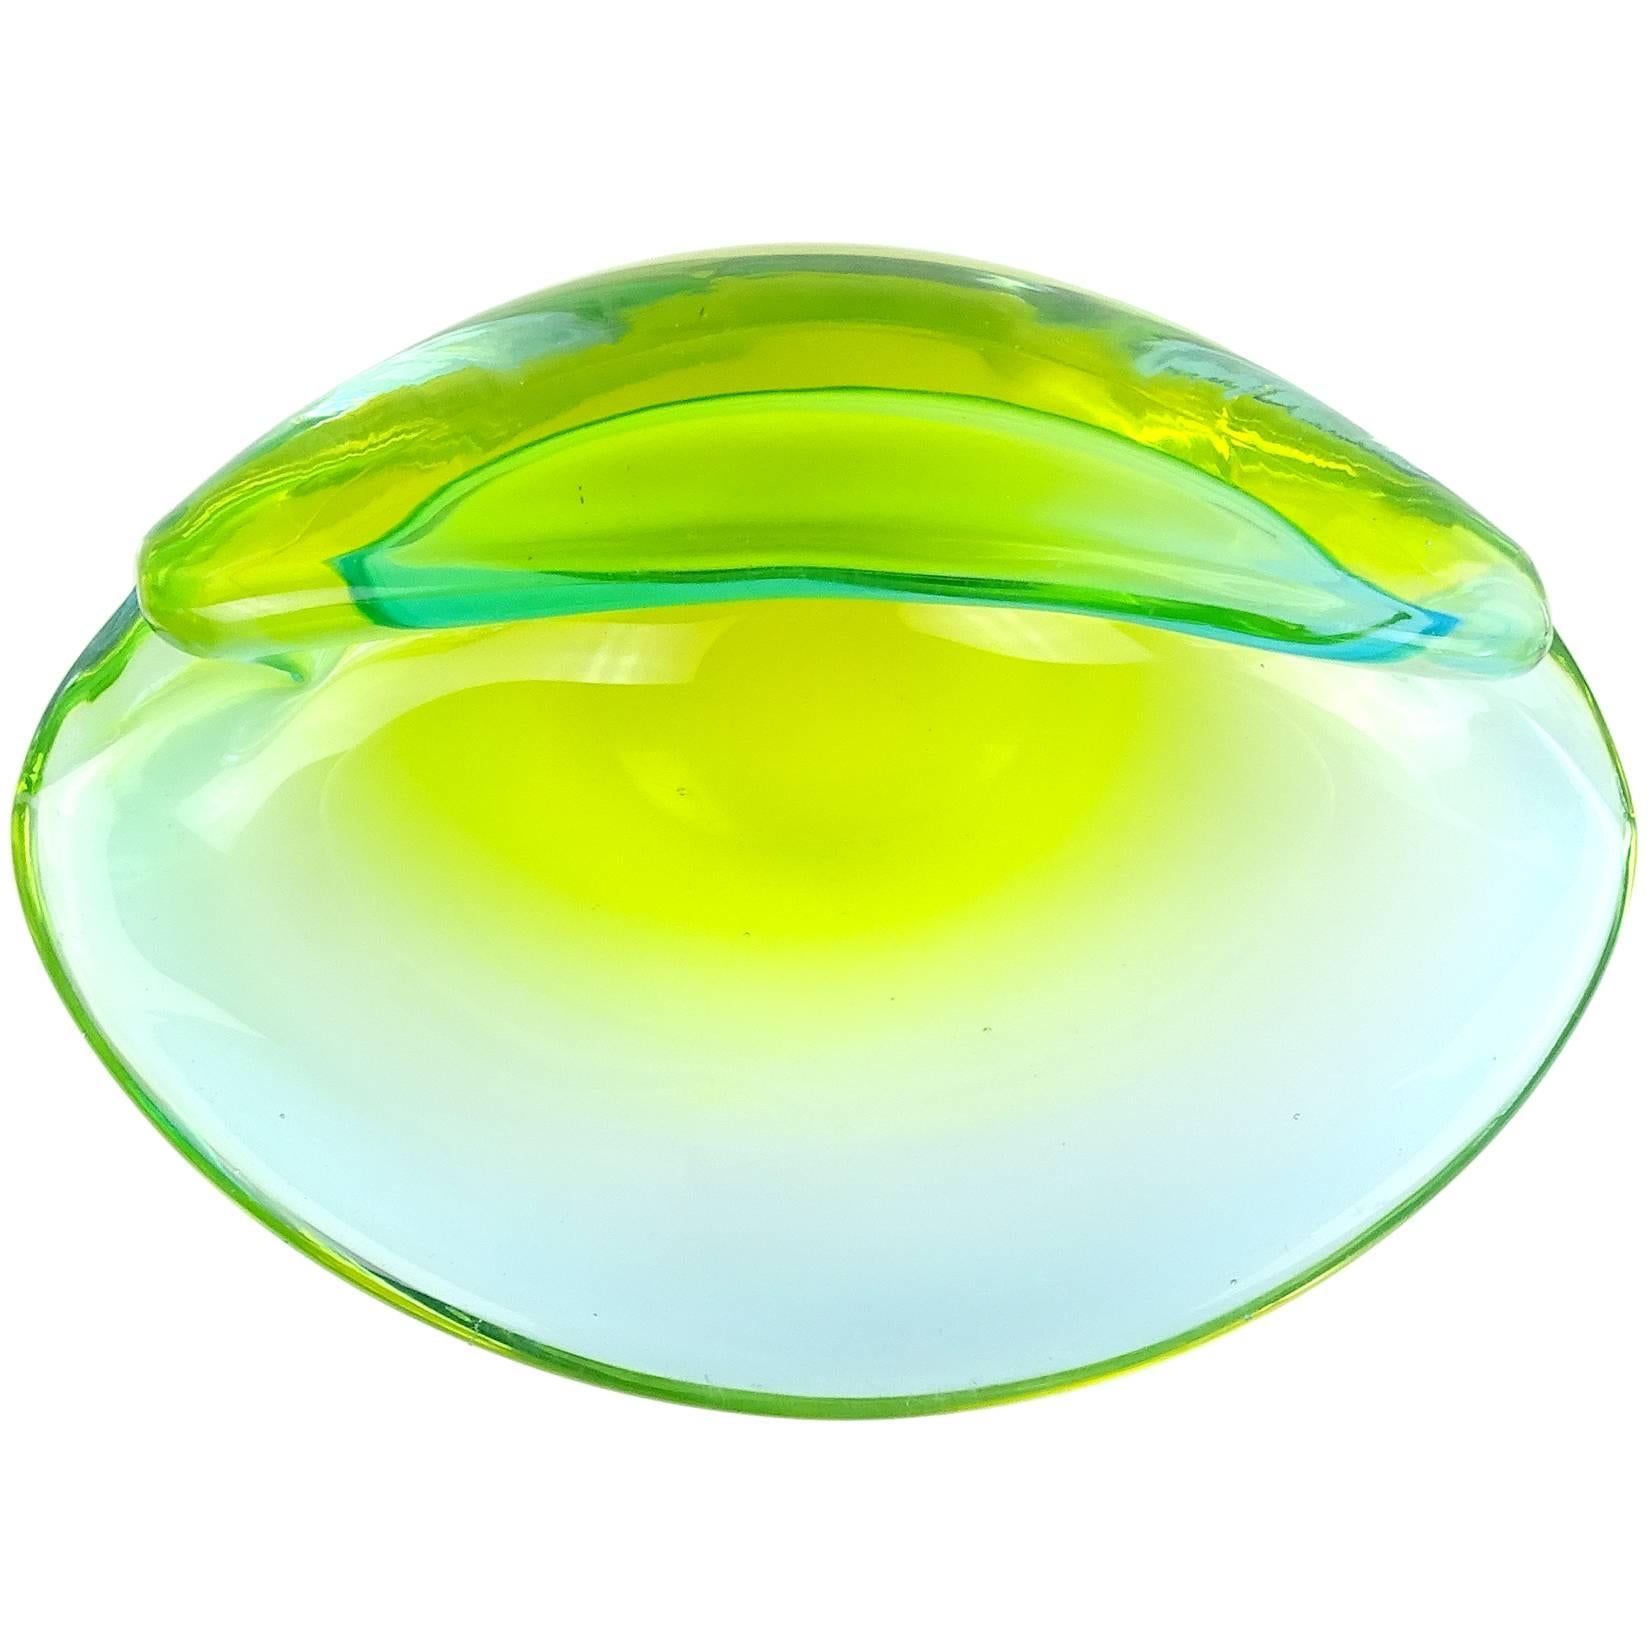 Beautiful Murano handblown Sommerso yellow green with hints of blue, Italian art glass seashell decorative bowl. Documented to the Cenedese Company. Great dish for jewelry, trinkets or even business cards. Measures: 7 1/4